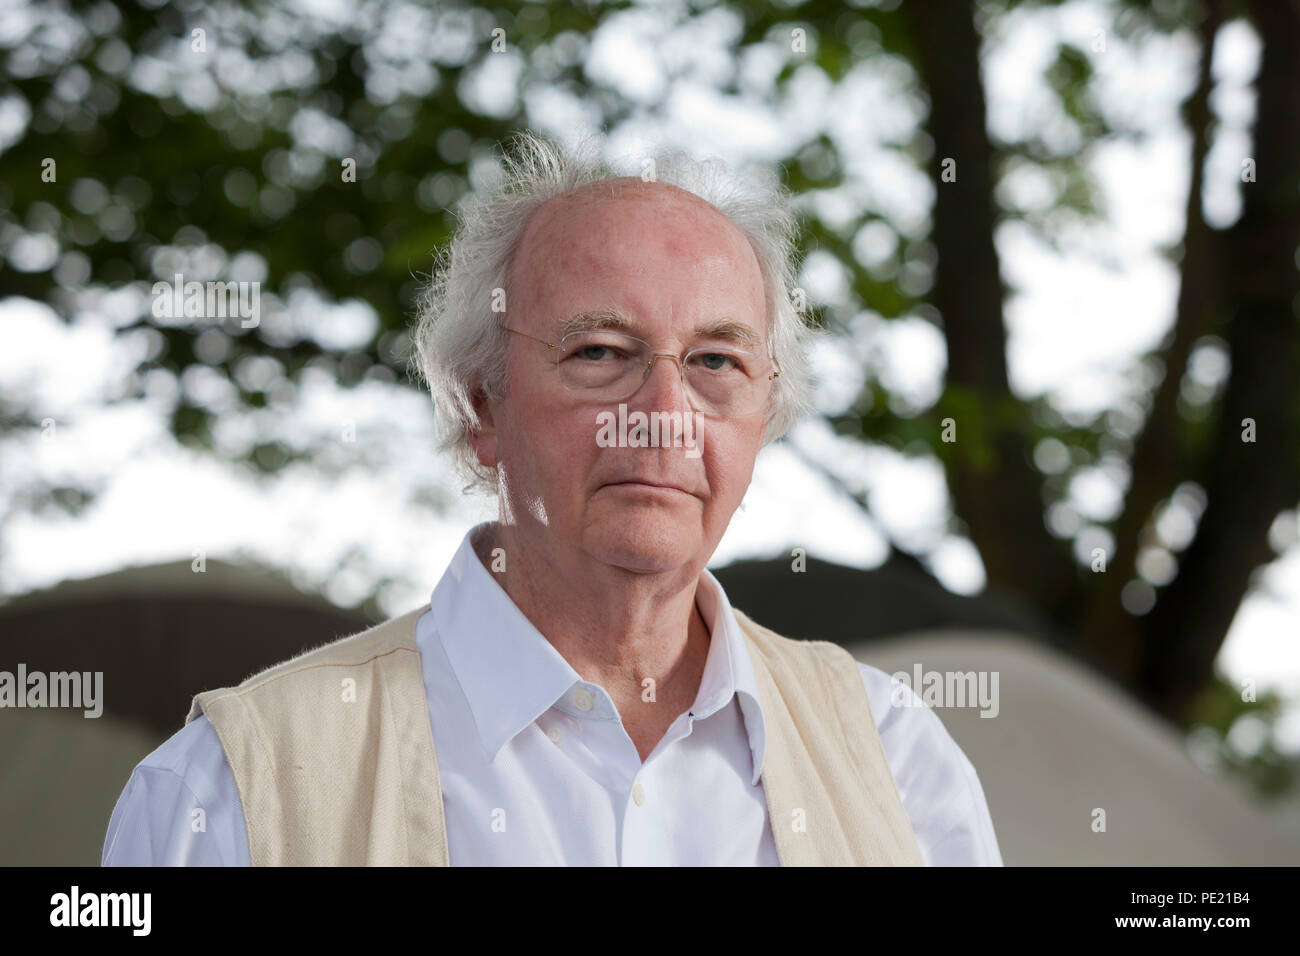 Edinburgh, UK. 11th August, 2018. Philip Pullman, the English novelist. He is the author of several best-selling books, including the fantasy trilogy His Dark Materials, pictured at the Edinburgh International Book Festival. Edinburgh, Scotland.  Picture by Gary Doak / Alamy Live News Stock Photo